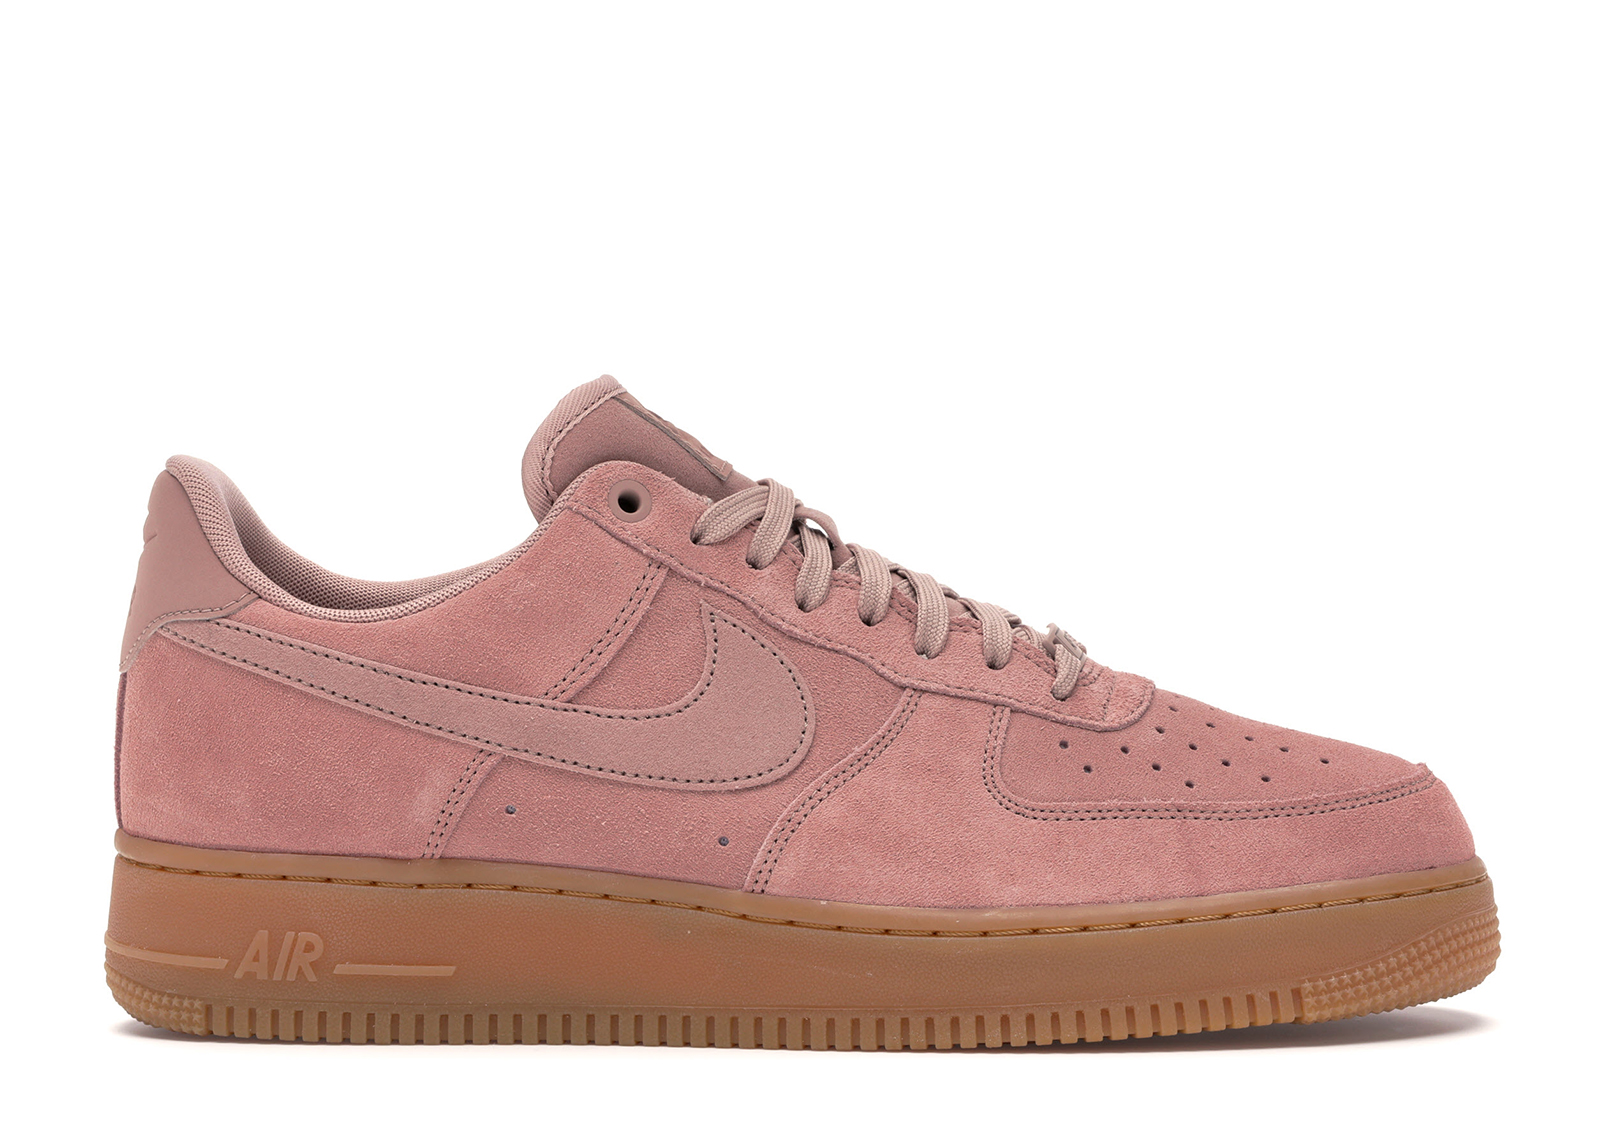 Nike Air Force 1 Low Particle Pink Gum Men's - AA1117-600 - US